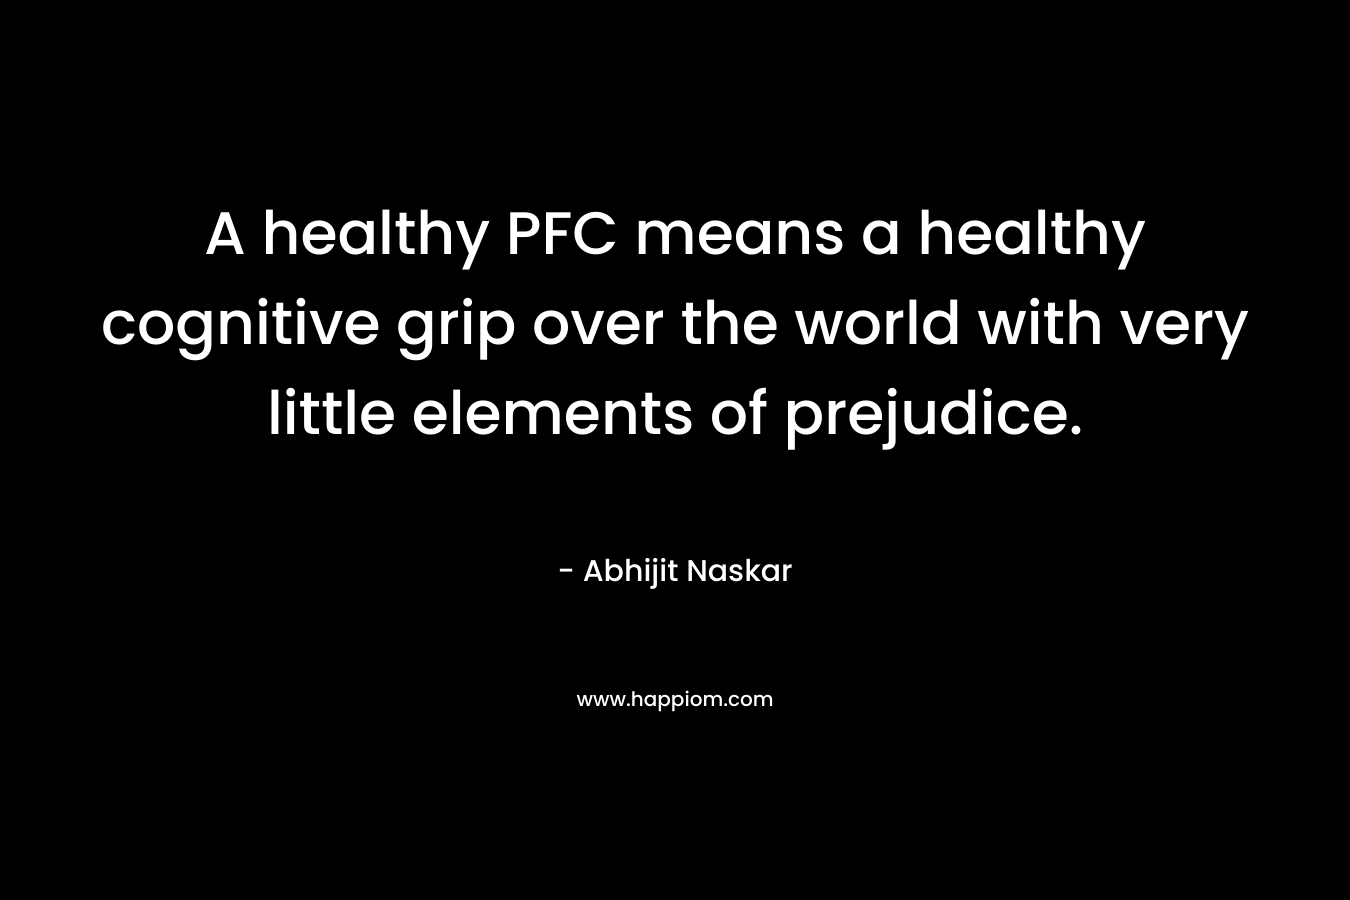 A healthy PFC means a healthy cognitive grip over the world with very little elements of prejudice.